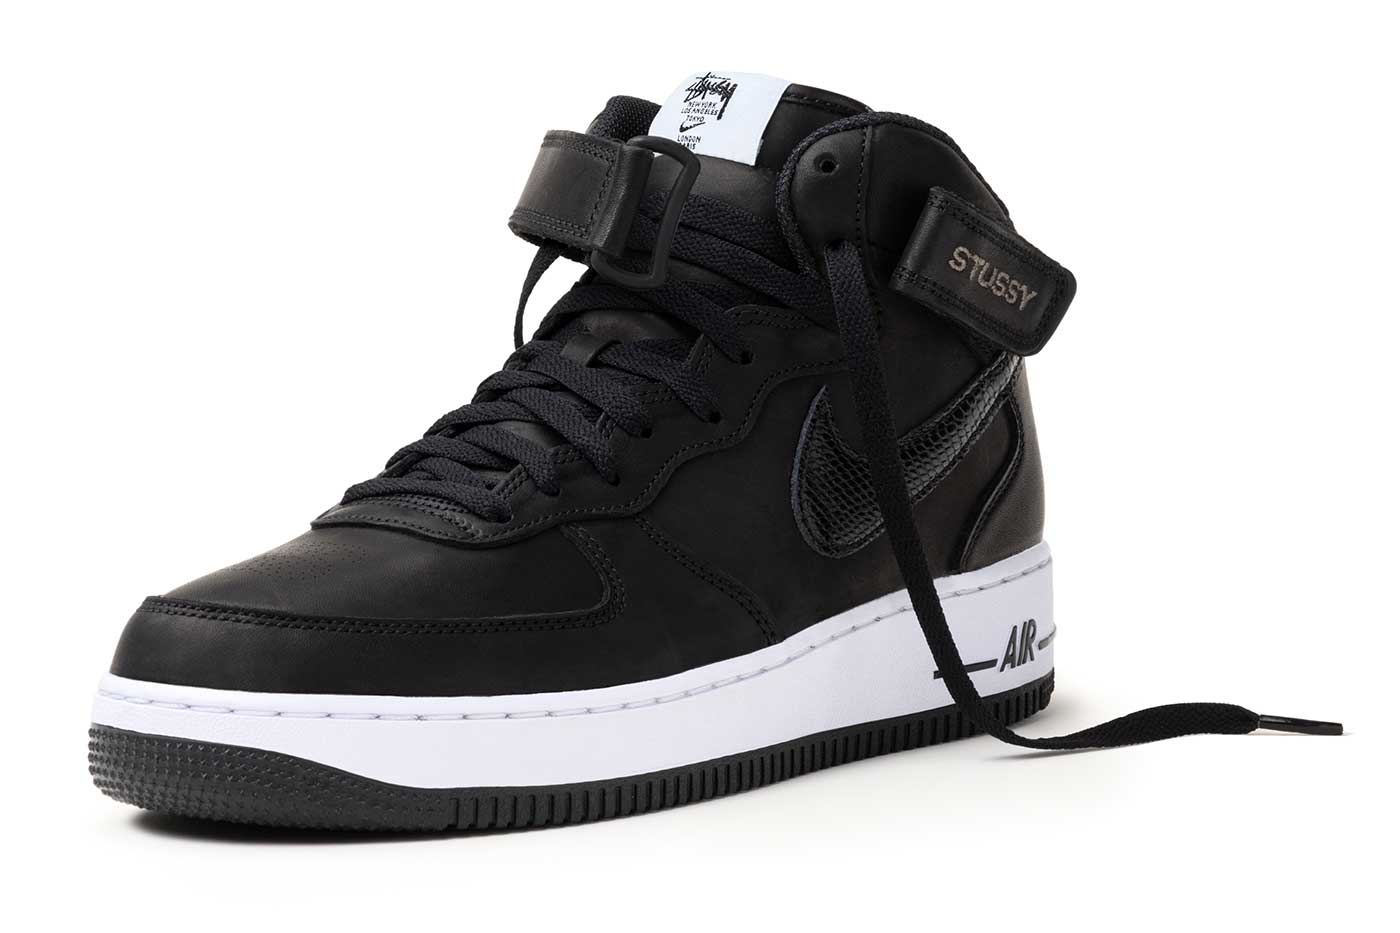 Stüssy x Nike Air Force 1 Mid Collab Release Date, Price